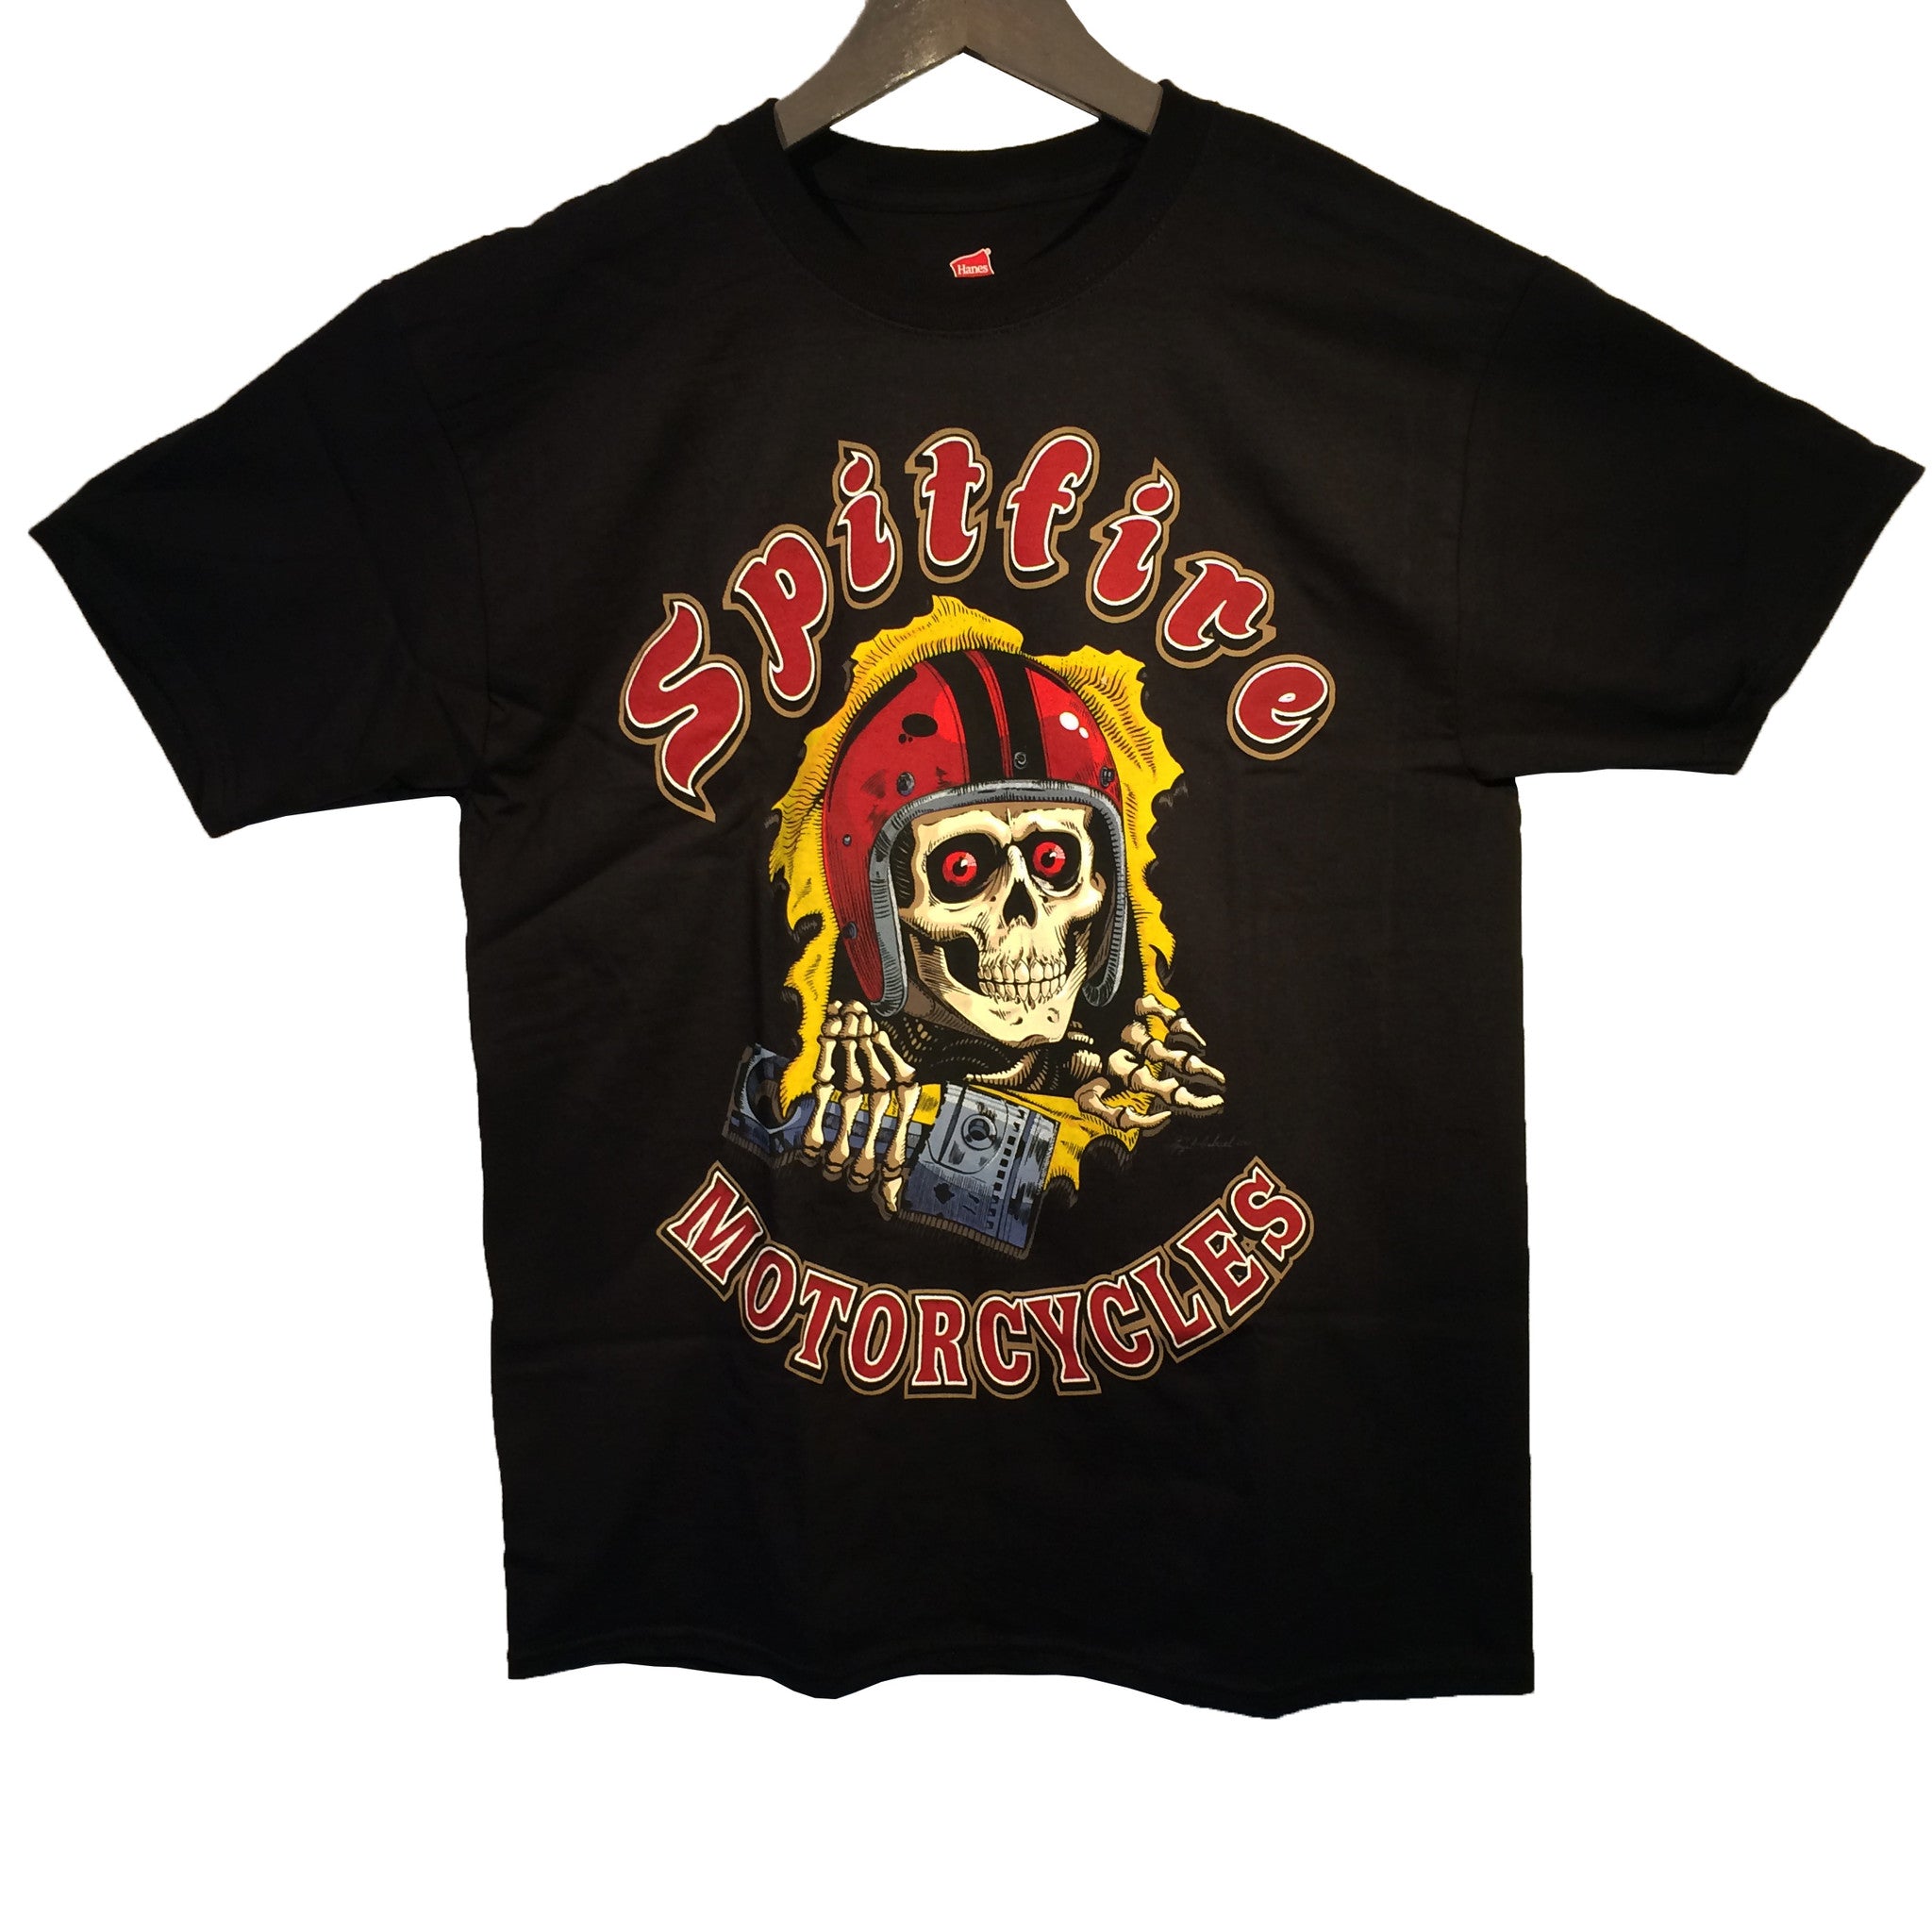 Spitfire Motorcycles] Ripper S/S Tee (リパー 半袖 Tシャツ